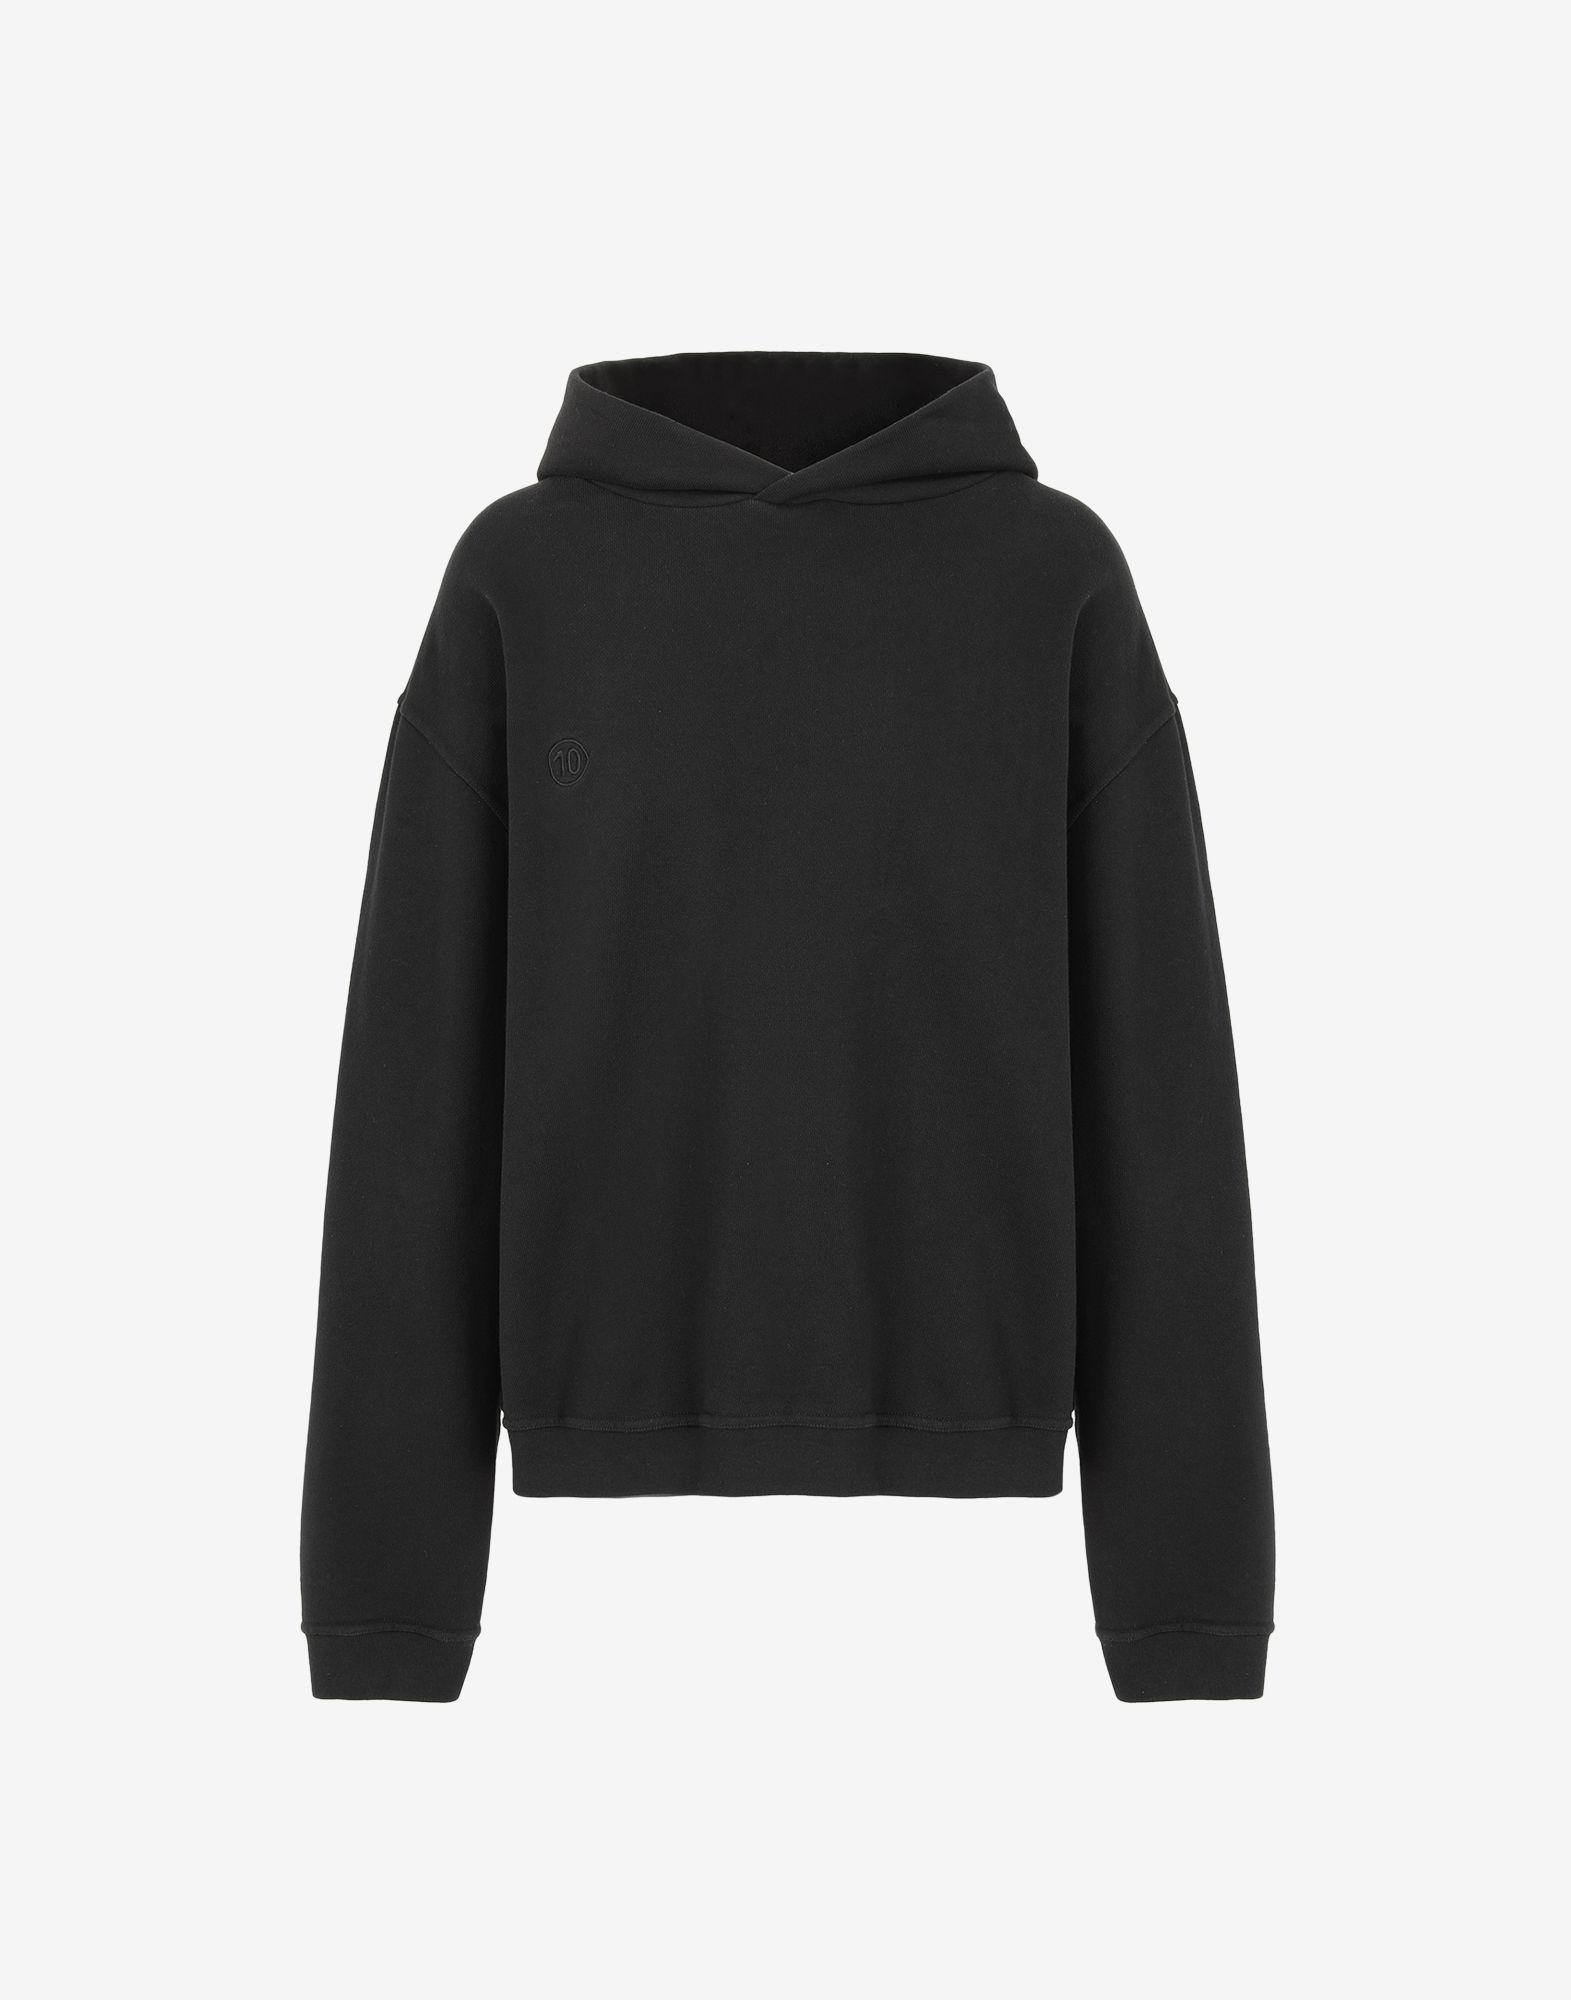 Maison Margiela Cotton Punched Holes Logo Hoodie in Black for Men - Lyst